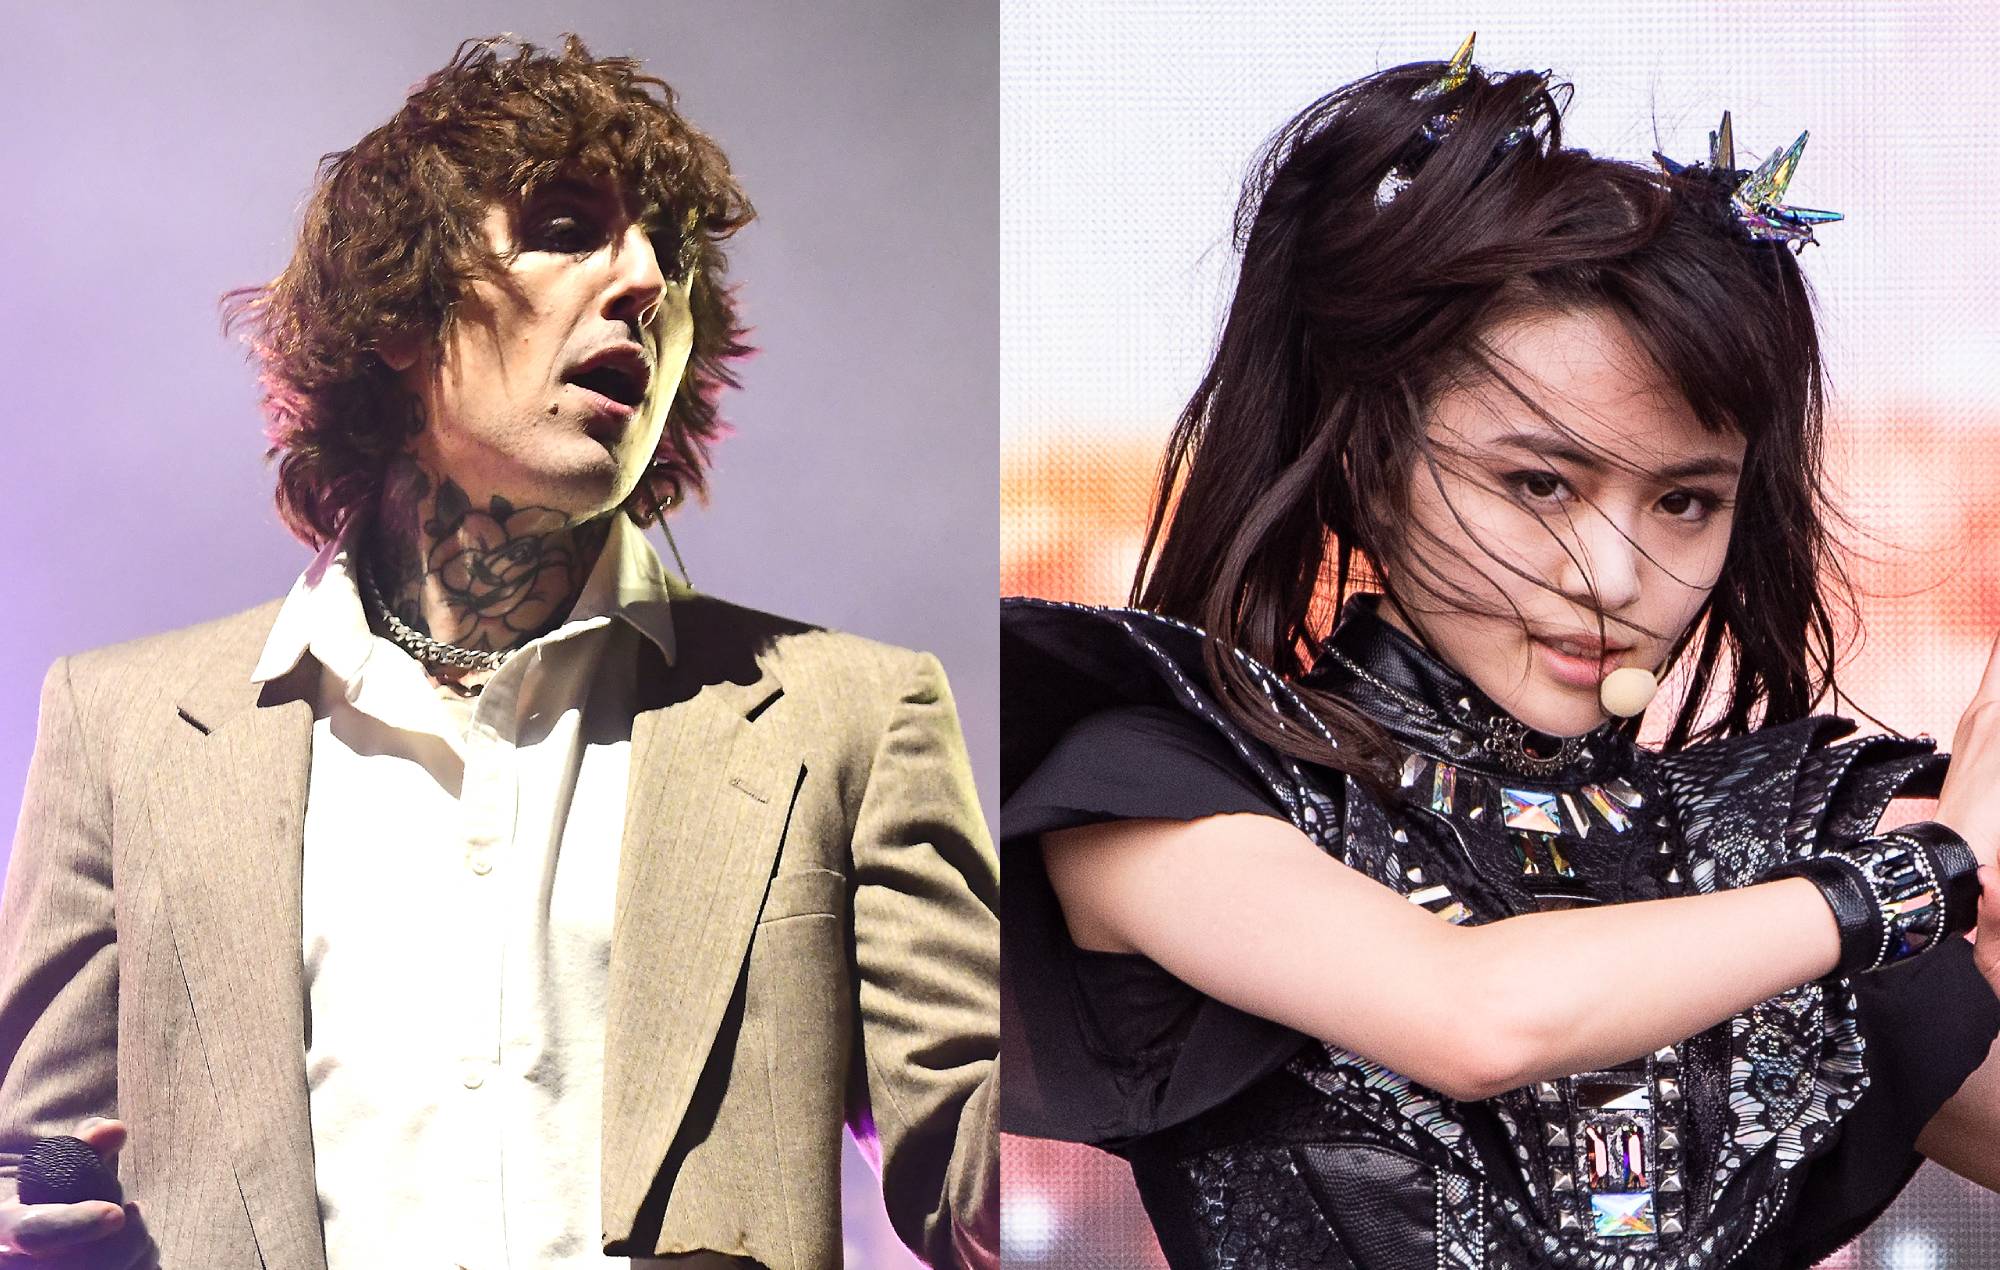 Watch Bring Me The Horizon and BABYMETAL perform ‘Kingslayer’ together in Japan